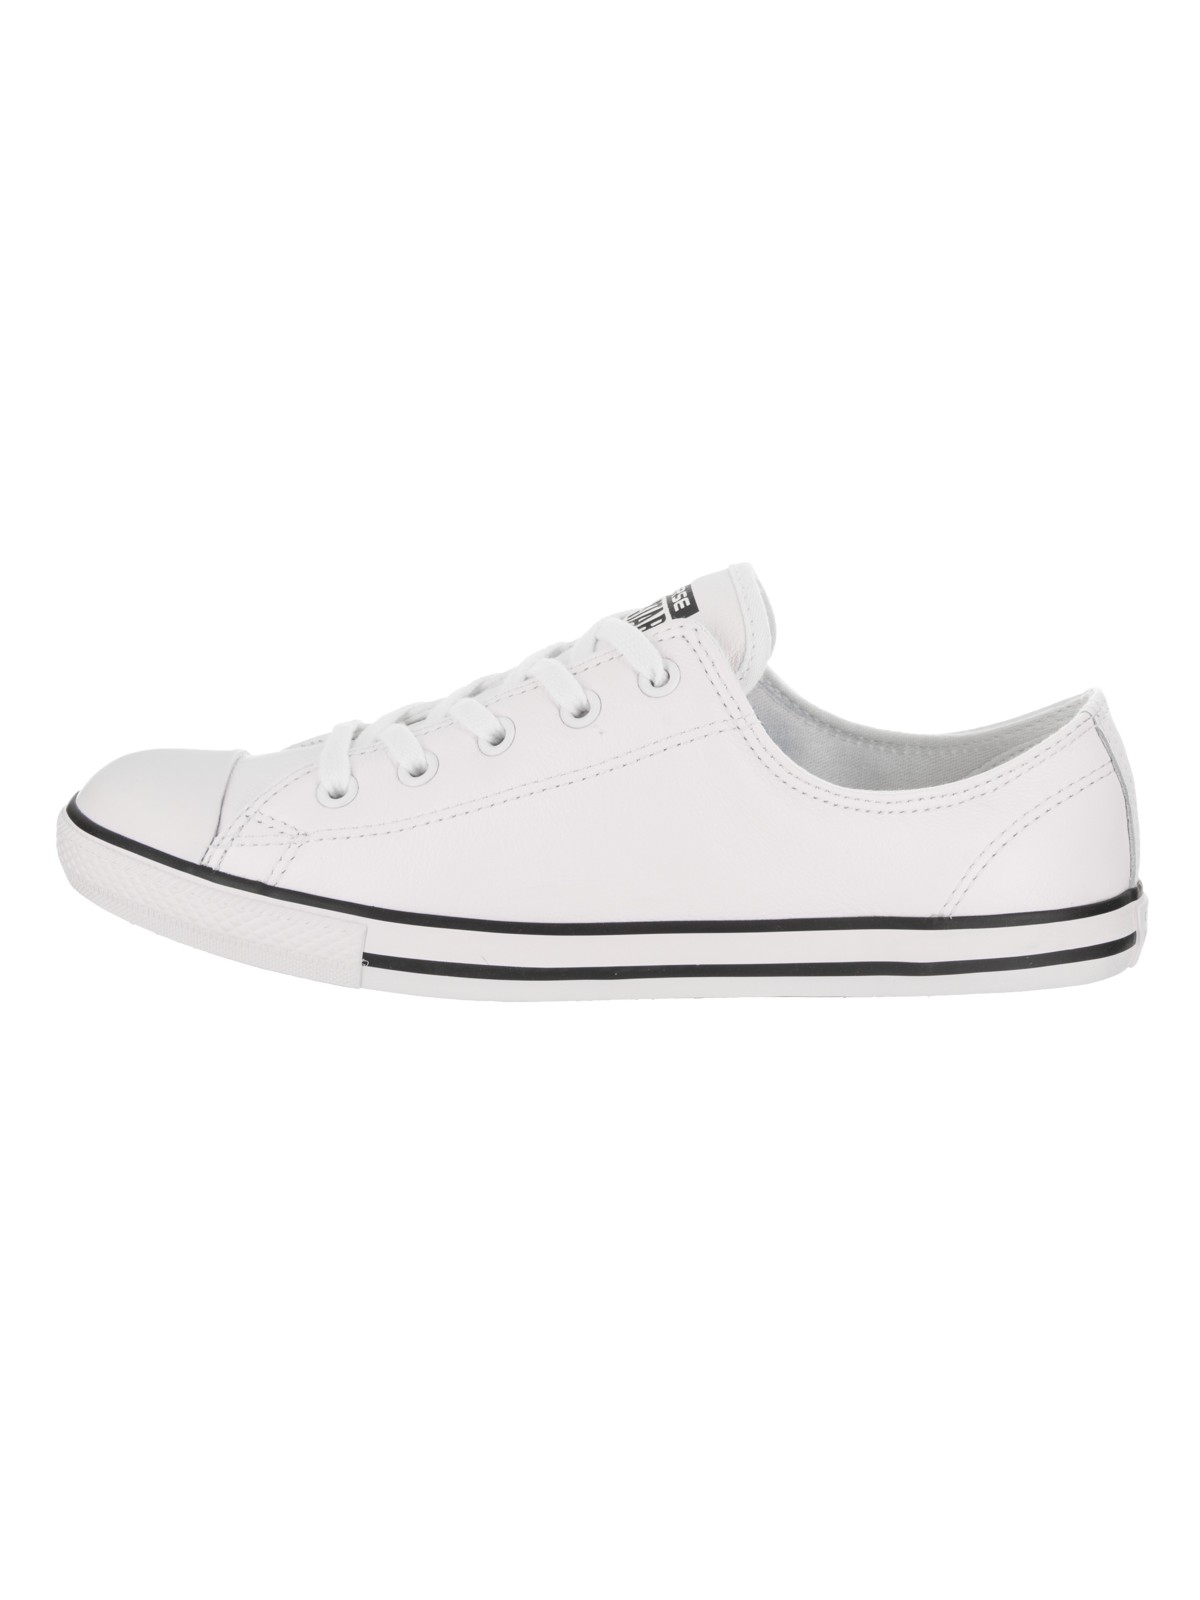 Converse Women's Chuck Taylor All Star Dainty Ox Casual Shoe - image 3 of 5